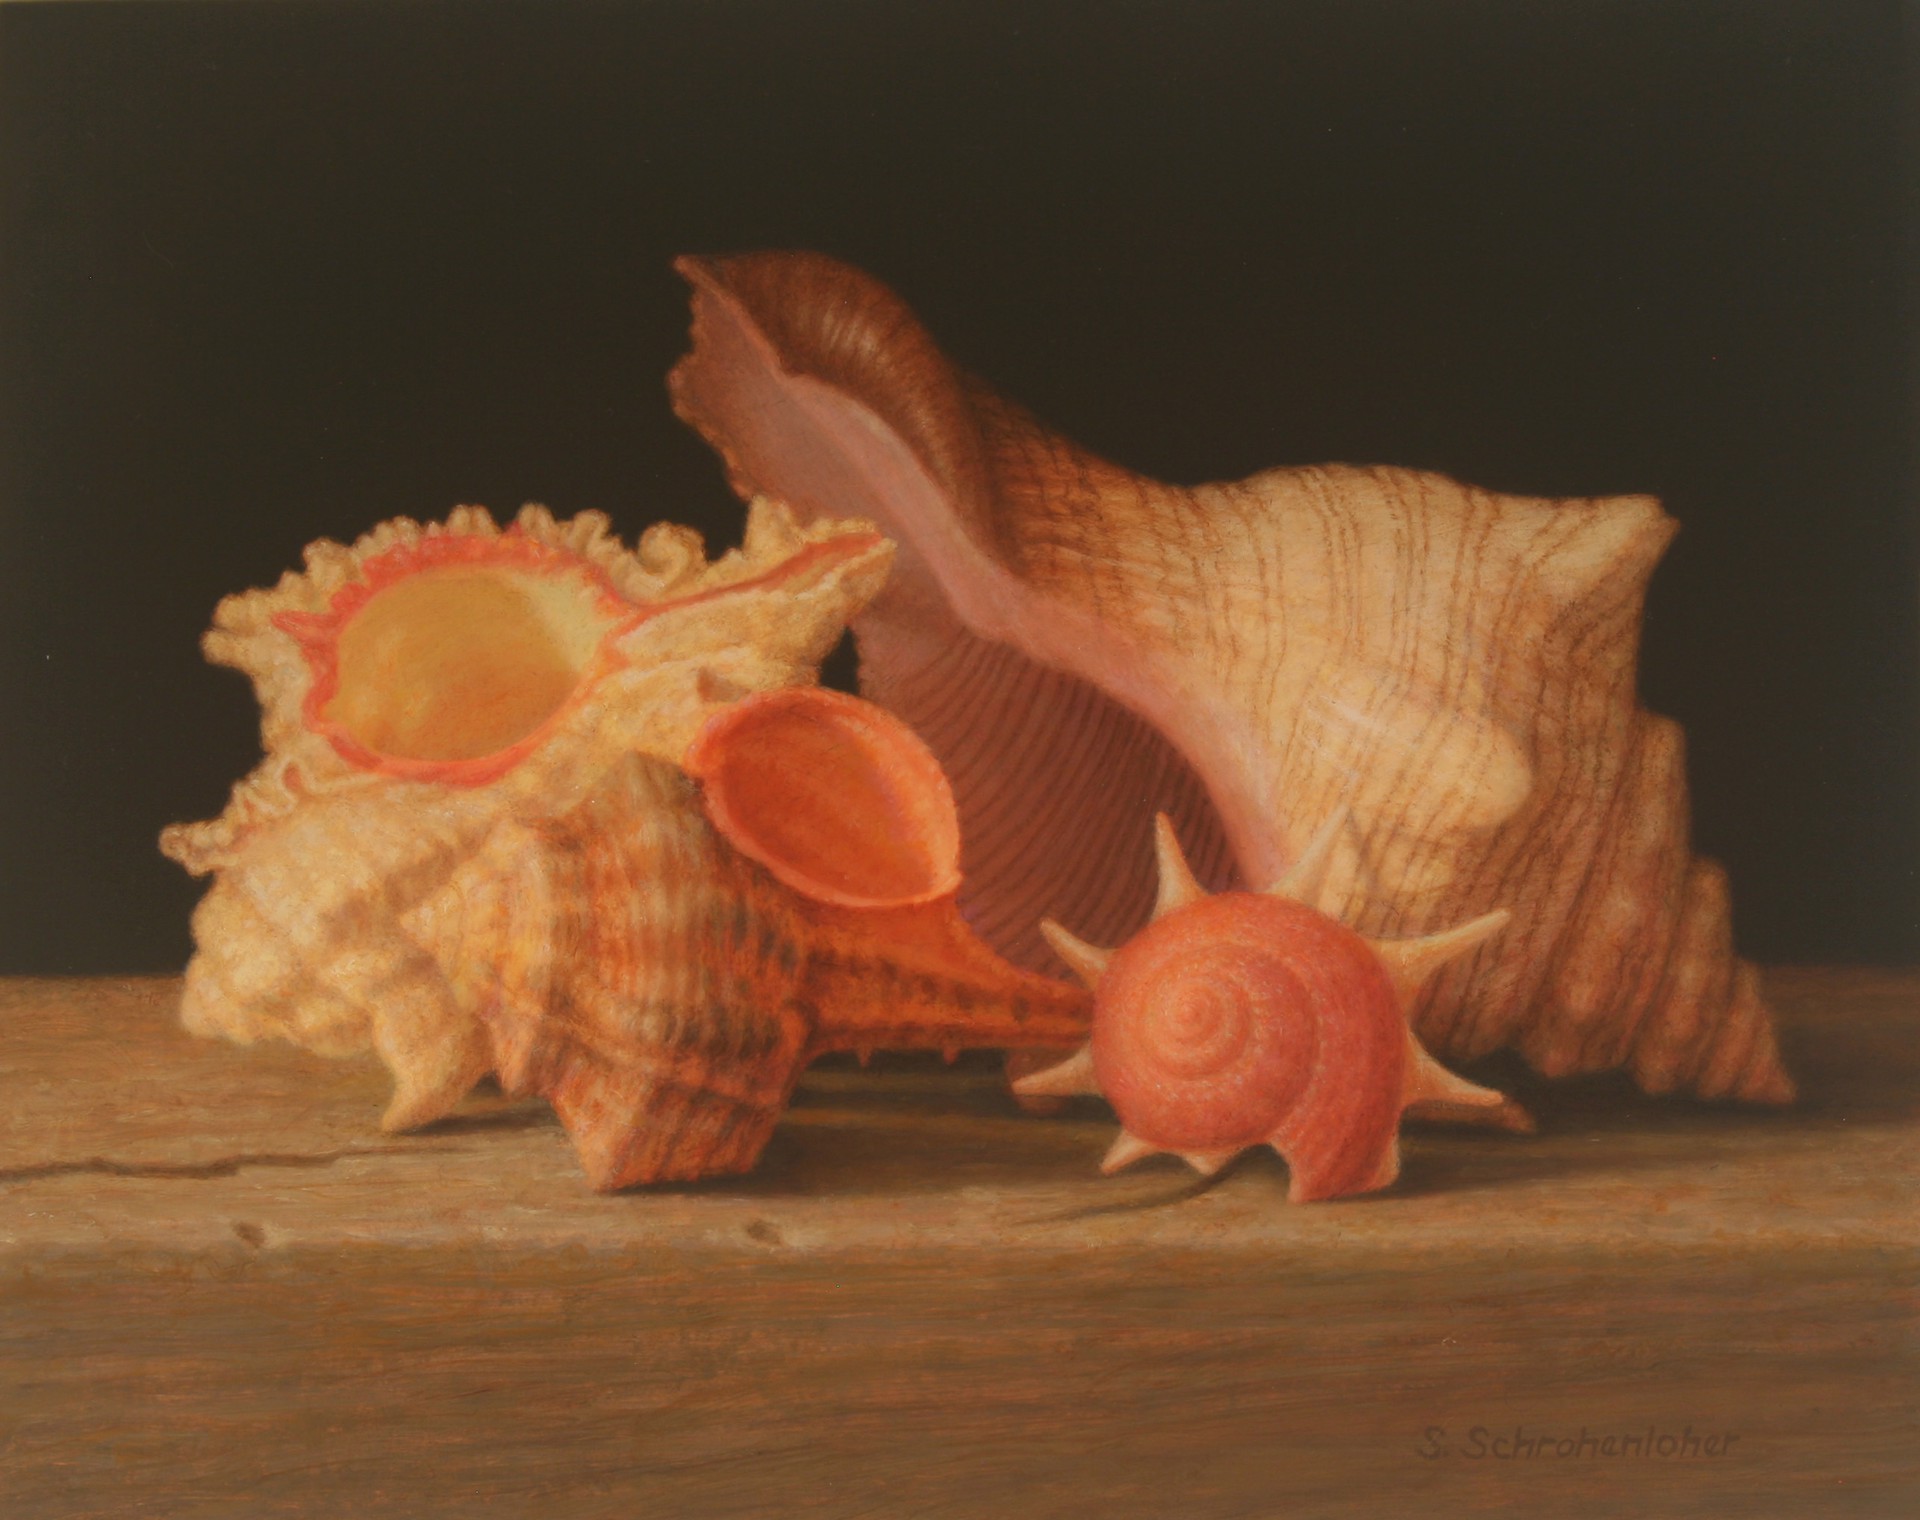 Four Small Shells by Sally Schrohenloher